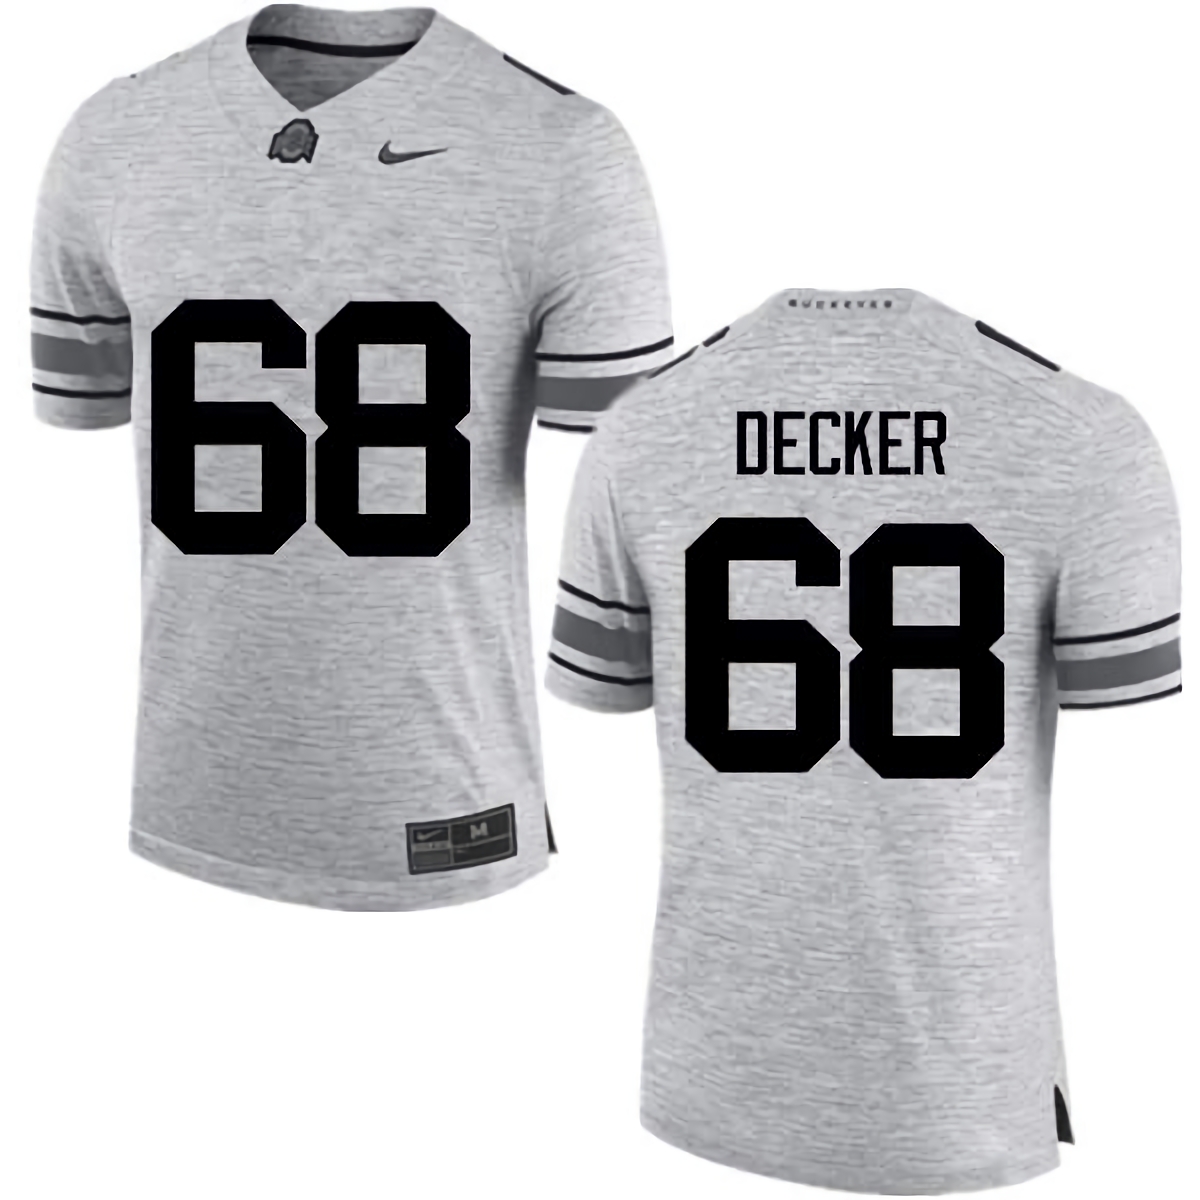 Taylor Decker Ohio State Buckeyes Men's NCAA #68 Nike Gray College Stitched Football Jersey MRW5556UH